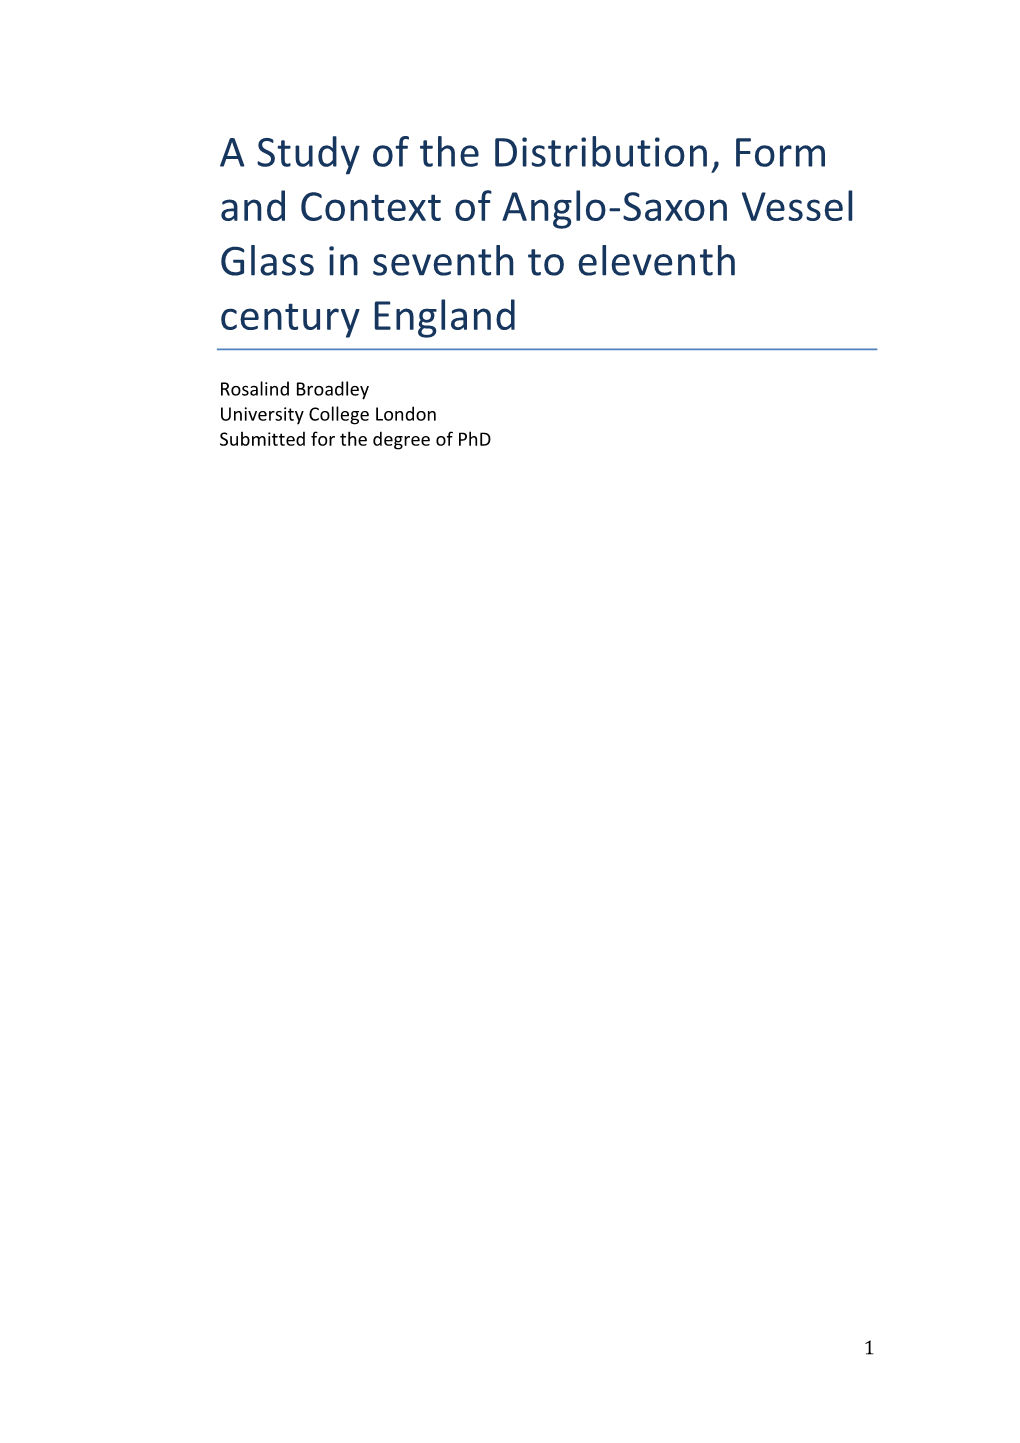 A Study of the Distribution, Form and Context of Anglo-Saxon Vessel Glass in Seventh to Eleventh Century England